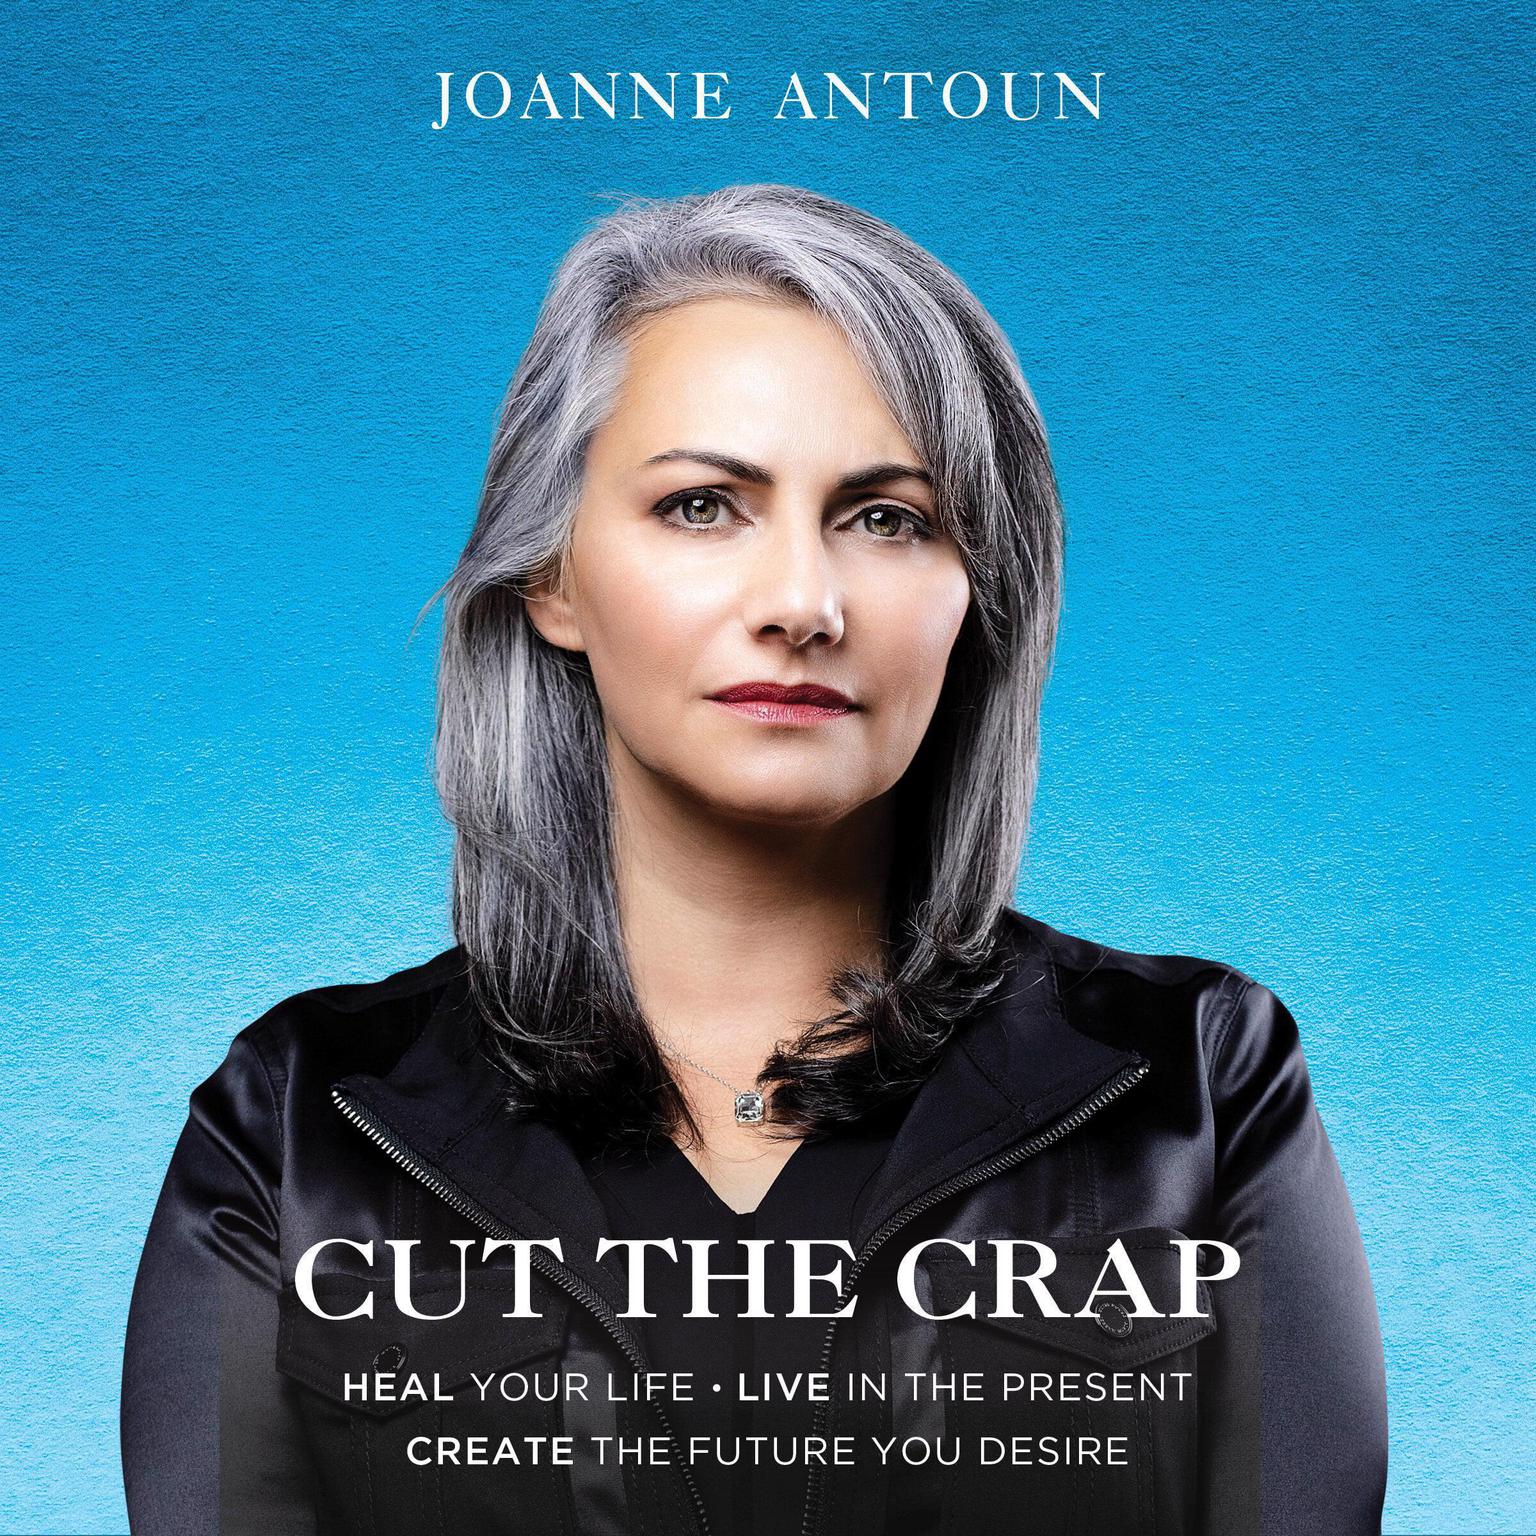 Cut the Crap: Heal Your Life, Live In the Present, Create the Future You Desire Audiobook, by Joanne Antoun